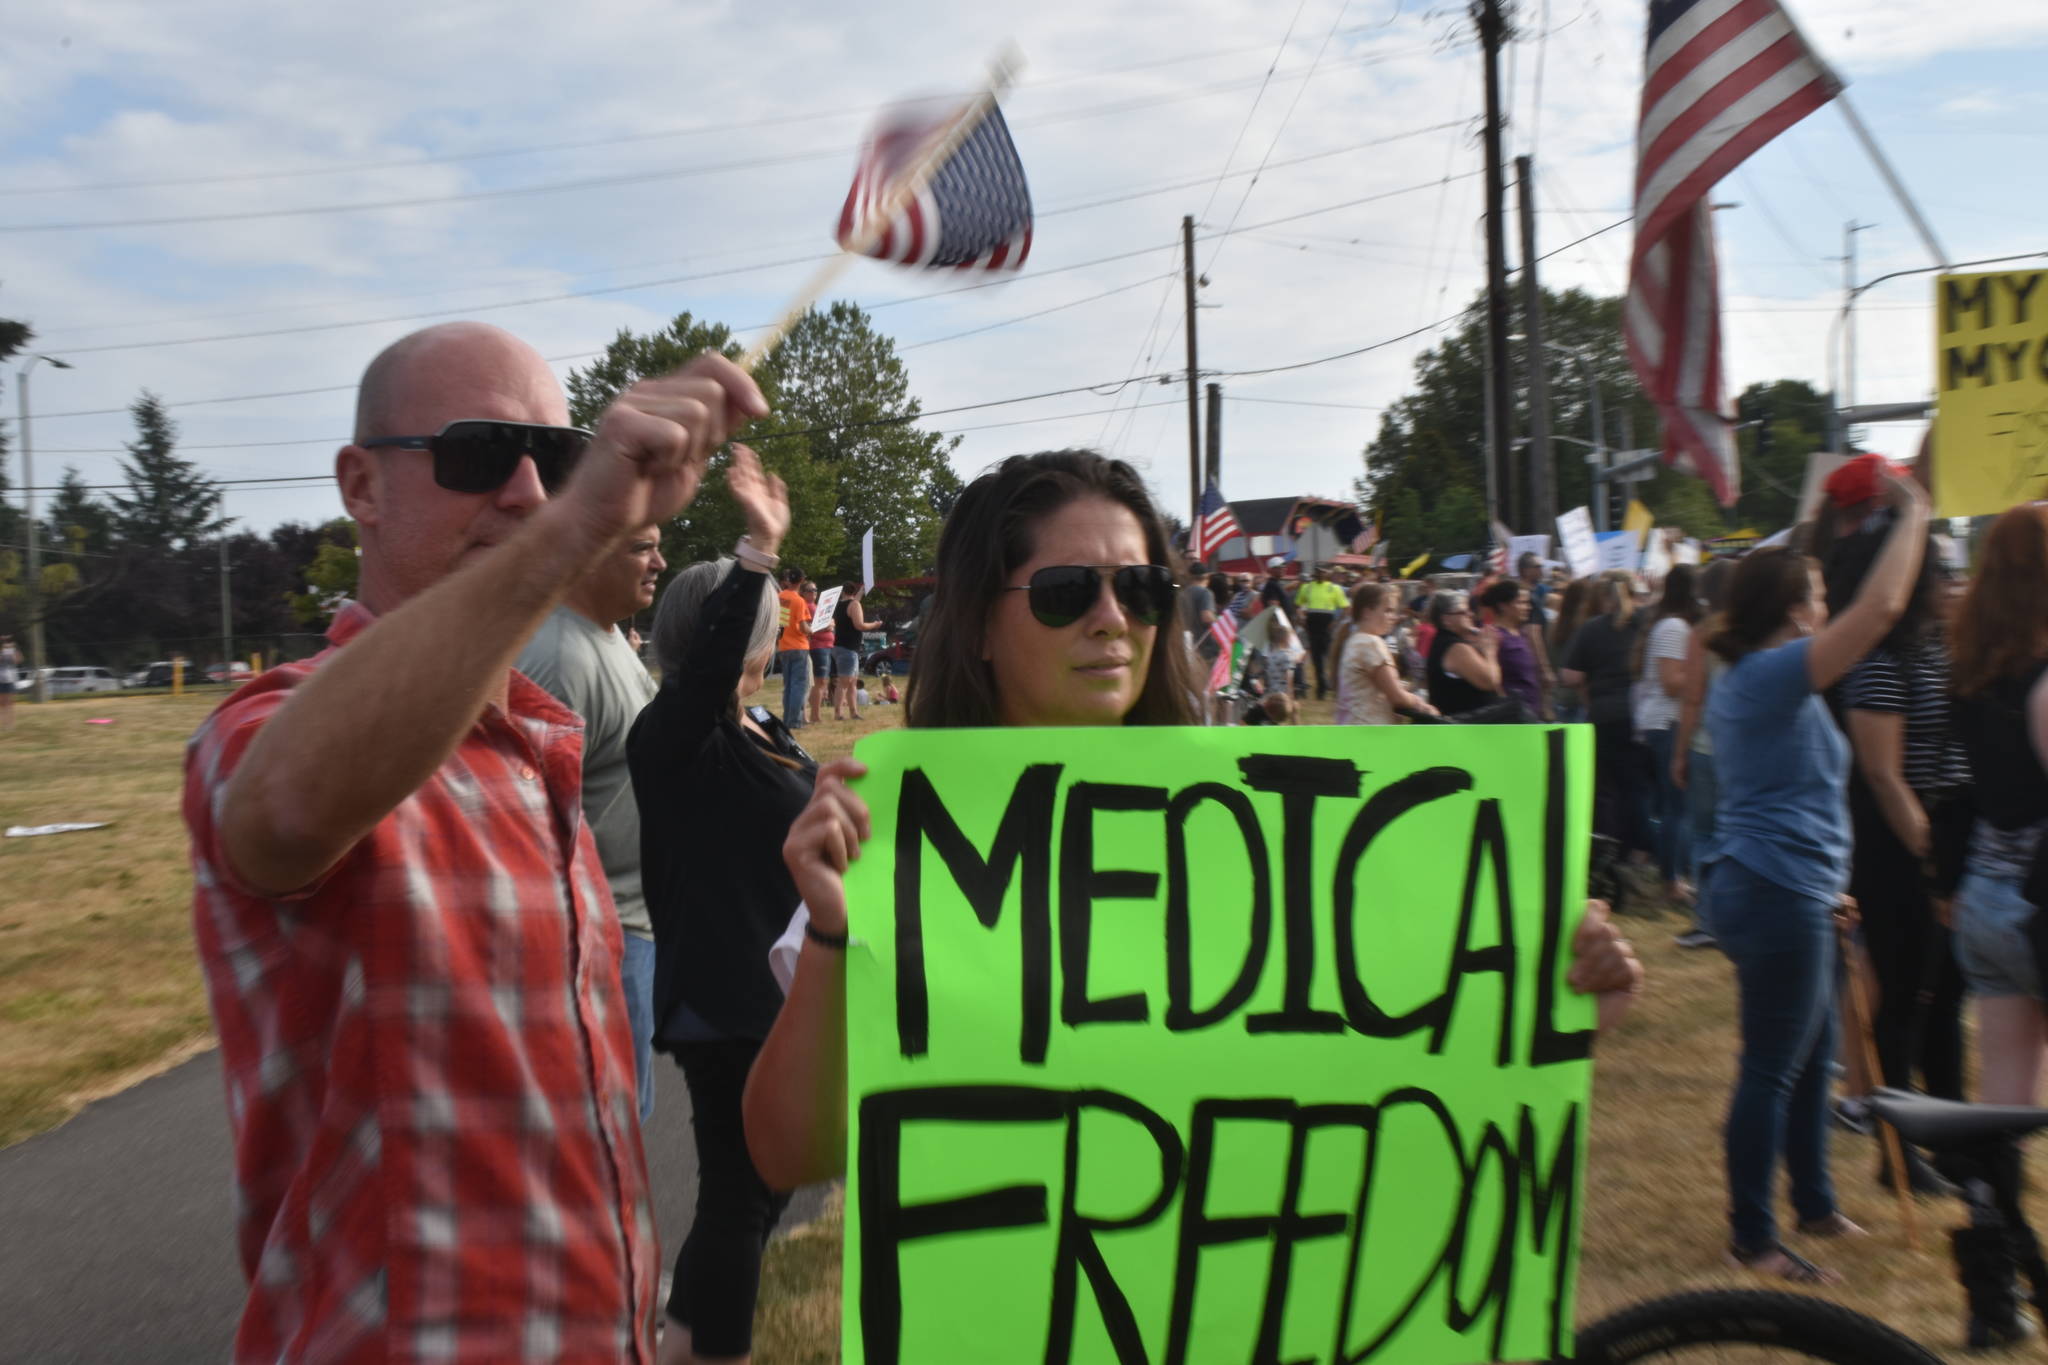 Scott and Leandre Usborn were among those at the “Rally for Medical Freedom” in Buckley on Wednesday. Photo by Alex Bruell.